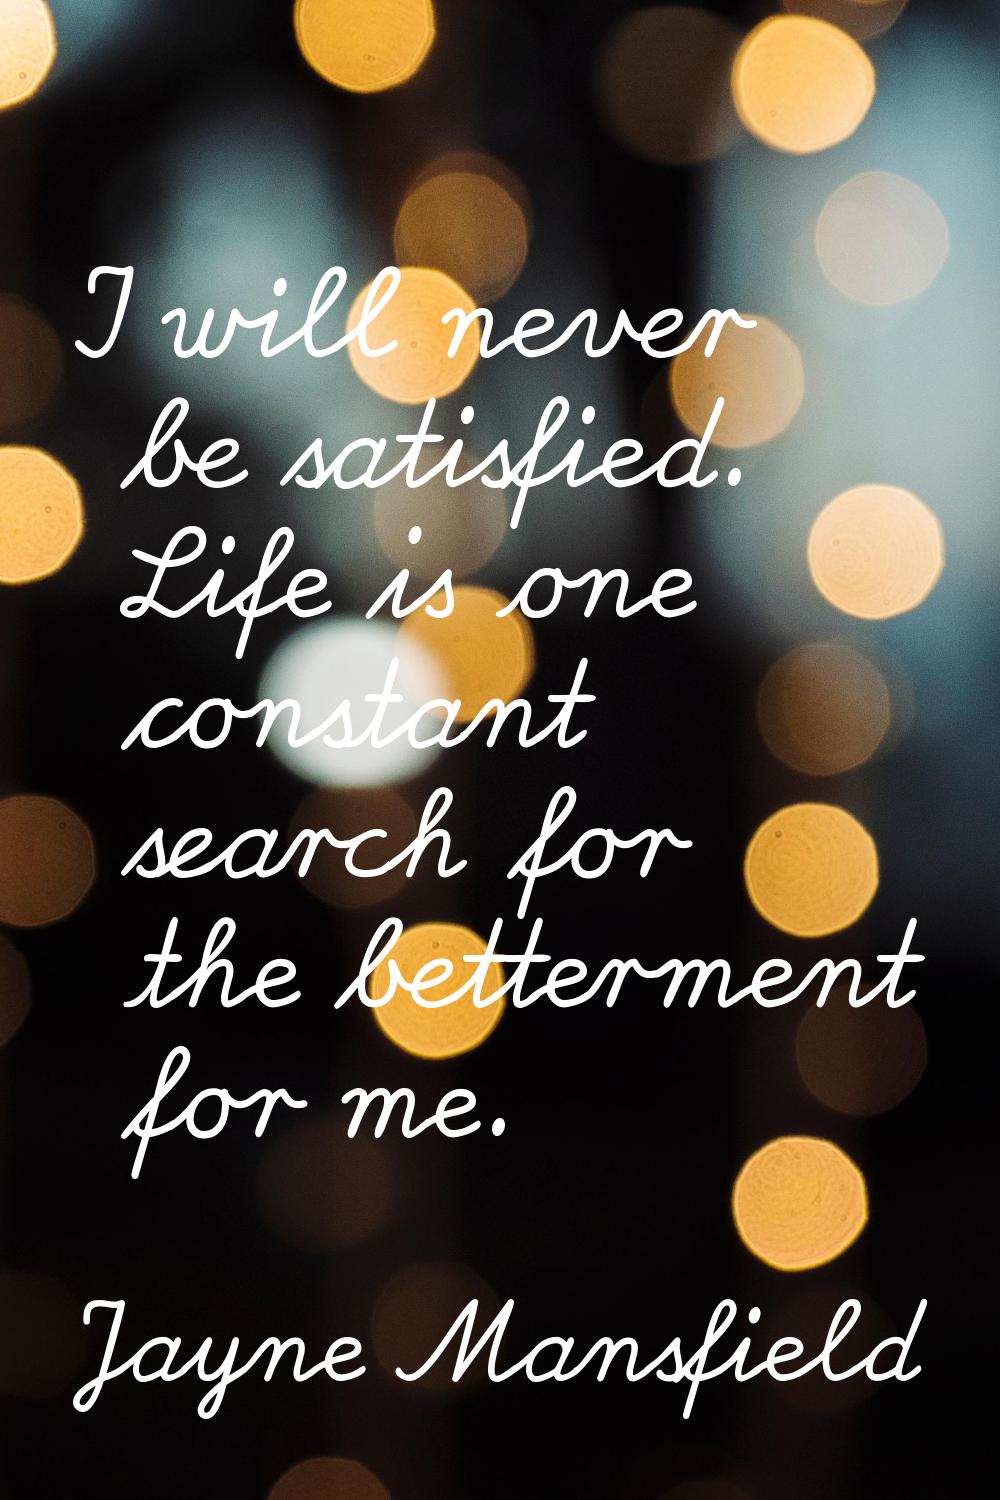 I will never be satisfied. Life is one constant search for the betterment for me.